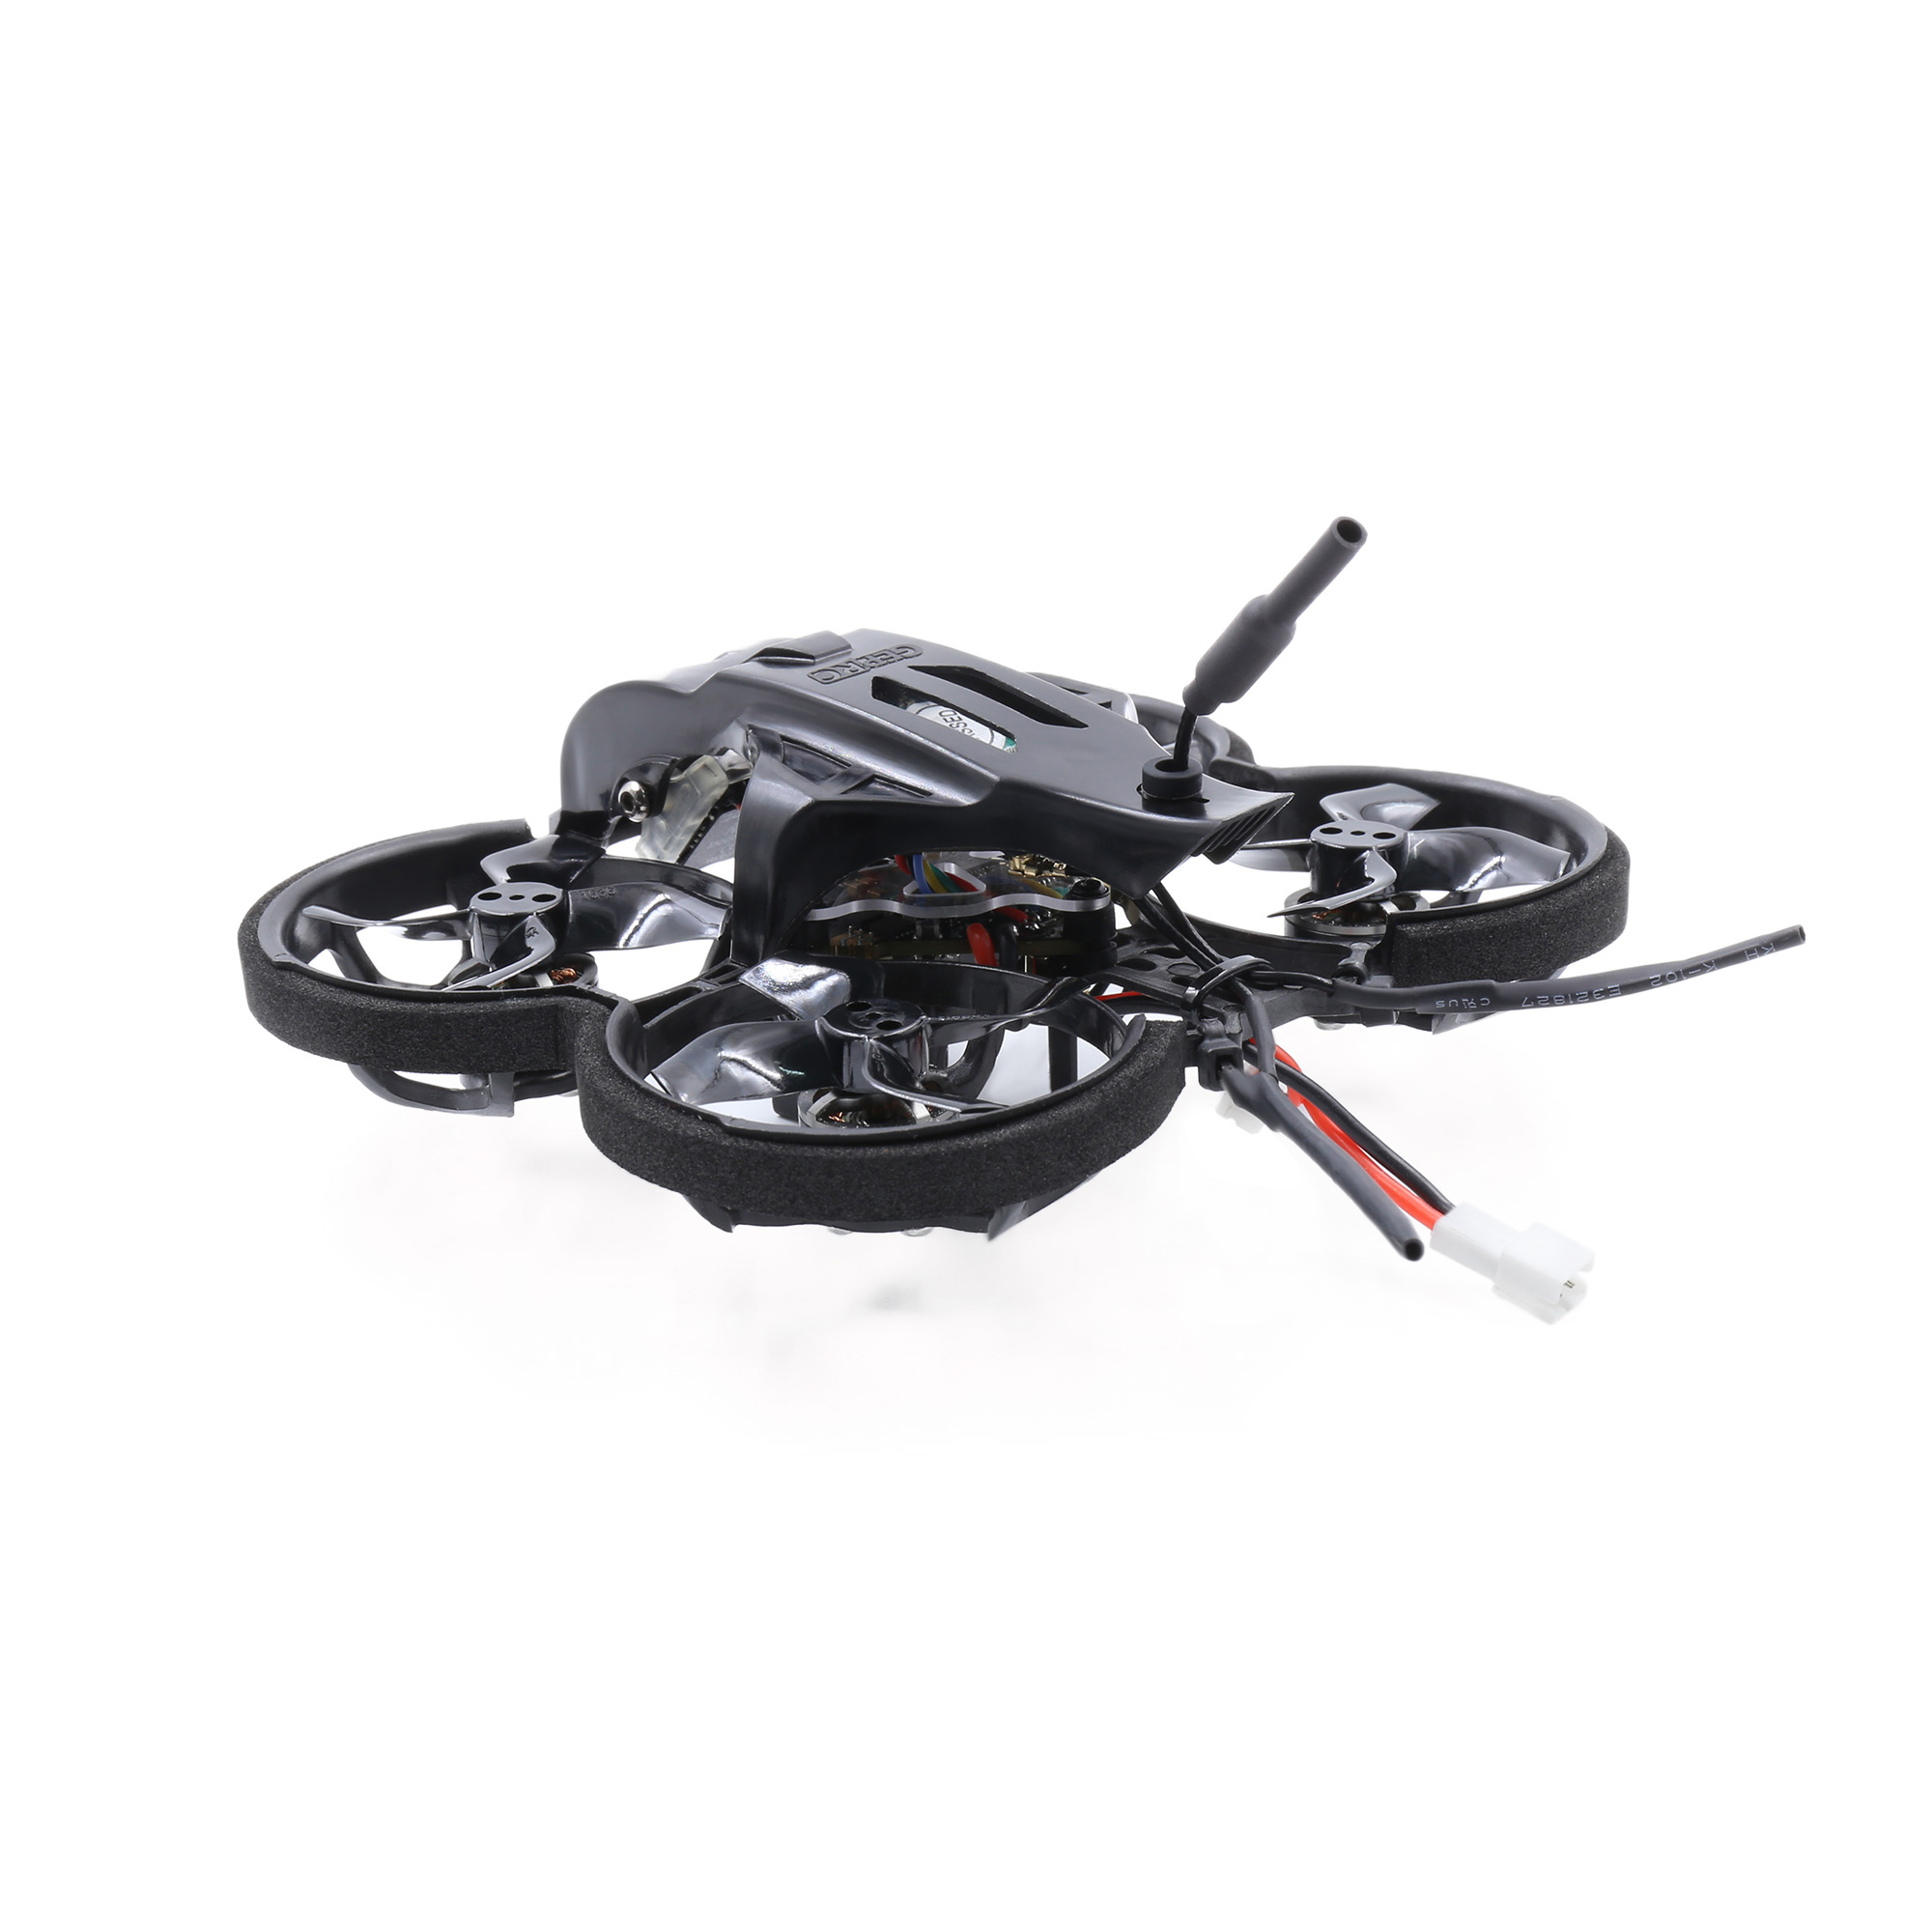 GEPRC-TinyGO-16inch-2S-FPV-Indoor-Whoop-Runcam-Nano2-GR8-Remote-ControllerRG1-Goggles-RTF-Ready-To-F-1788771-5